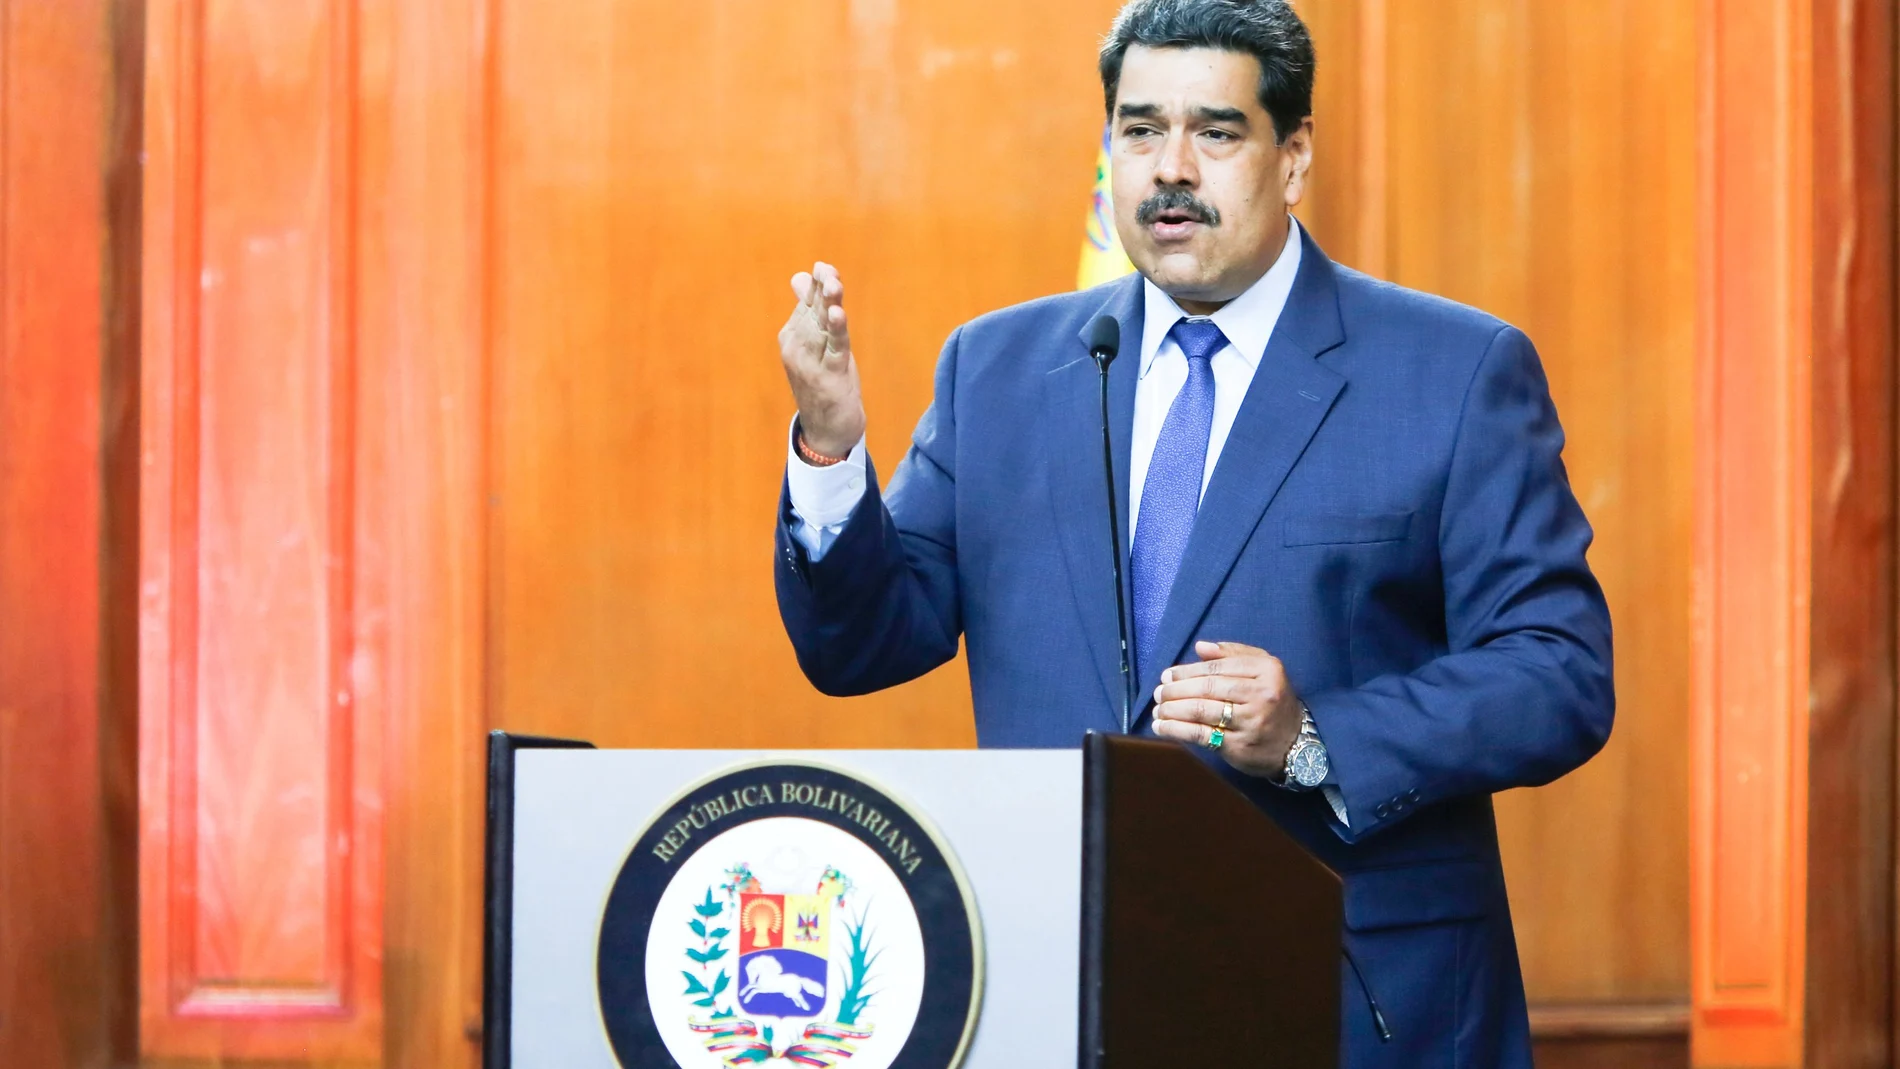 FILE PHOTO: Venezuela's President Nicolas Maduro speaks during the Venezuela's national award of journalism ceremony in Caracas, Venezuela June 29, 2020. Picture taken June 29, 2020. Miraflores Palace/Handout via REUTERS ATTENTION EDITORS - THIS PICTURE WAS PROVIDED BY A THIRD PARTY./File Photo